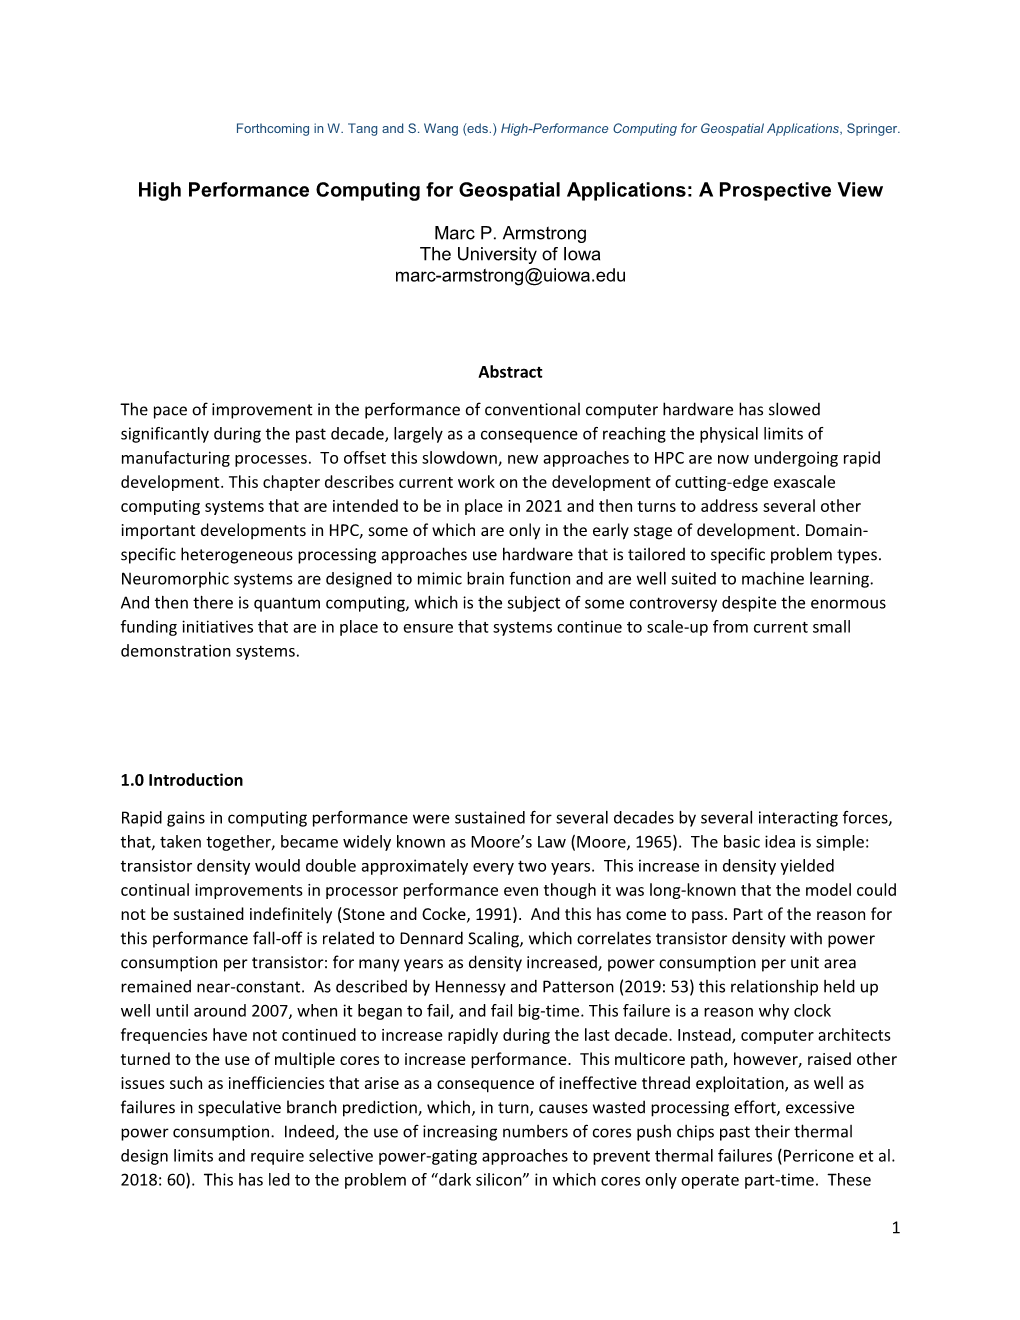 High Performance Computing for Geospatial Applications: a Prospective View